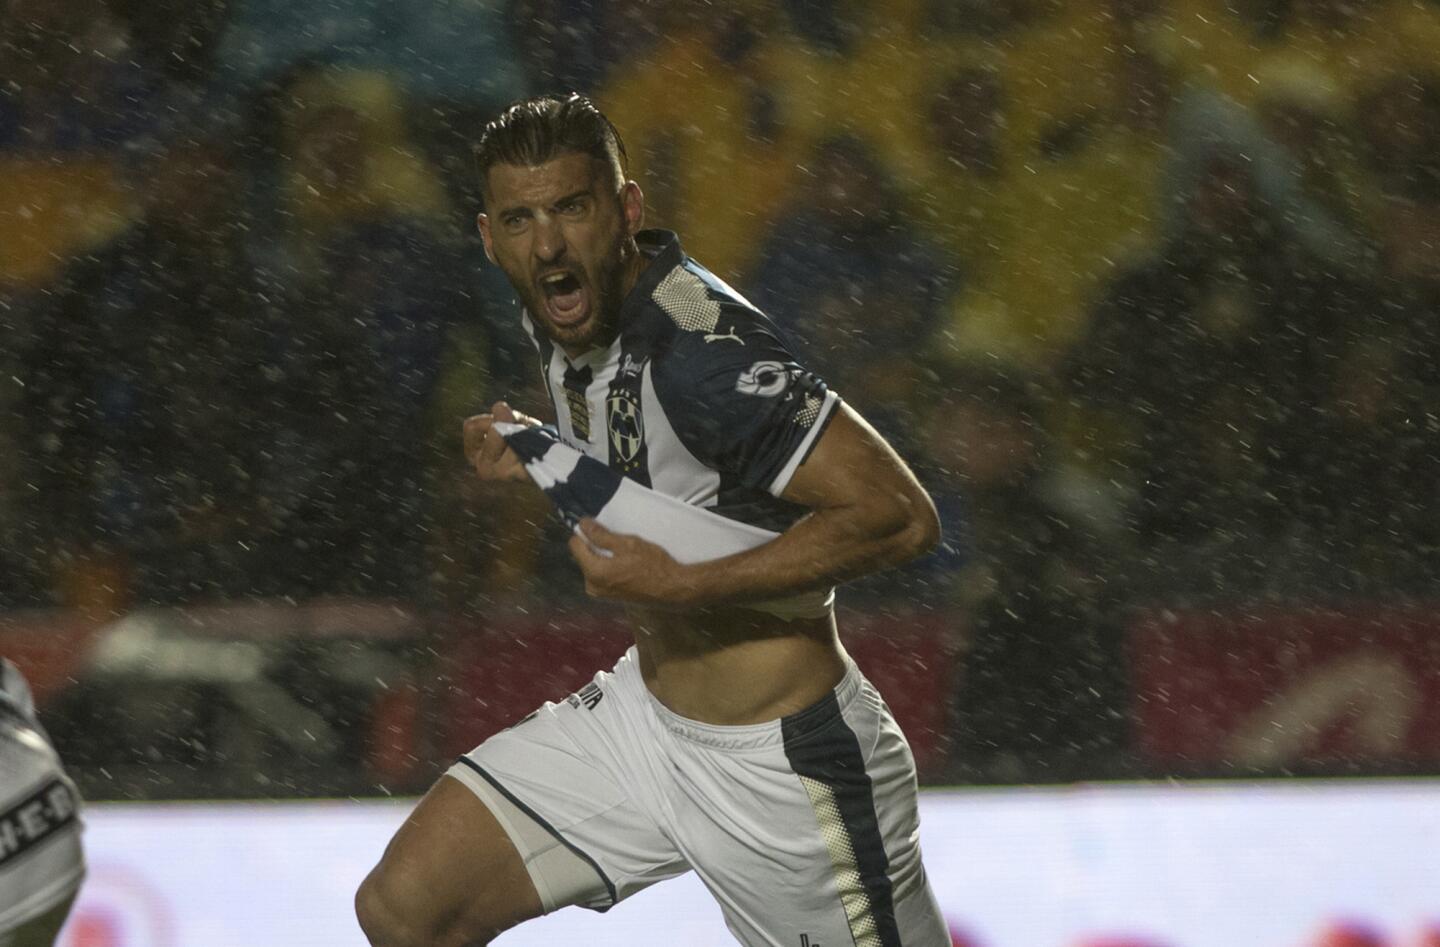 Monterrey' Nicolas Sanchez celebrates after scoring against Tigres during the first leg of the final of Mexican Apertura 2017 tournament football match at the Universitario stadium in Monterrey, Mexico on December 7, 2017. / AFP PHOTO / Julio Cesar AGUILARJULIO CESAR AGUILAR/AFP/Getty Images ** OUTS - ELSENT, FPG, CM - OUTS * NM, PH, VA if sourced by CT, LA or MoD **